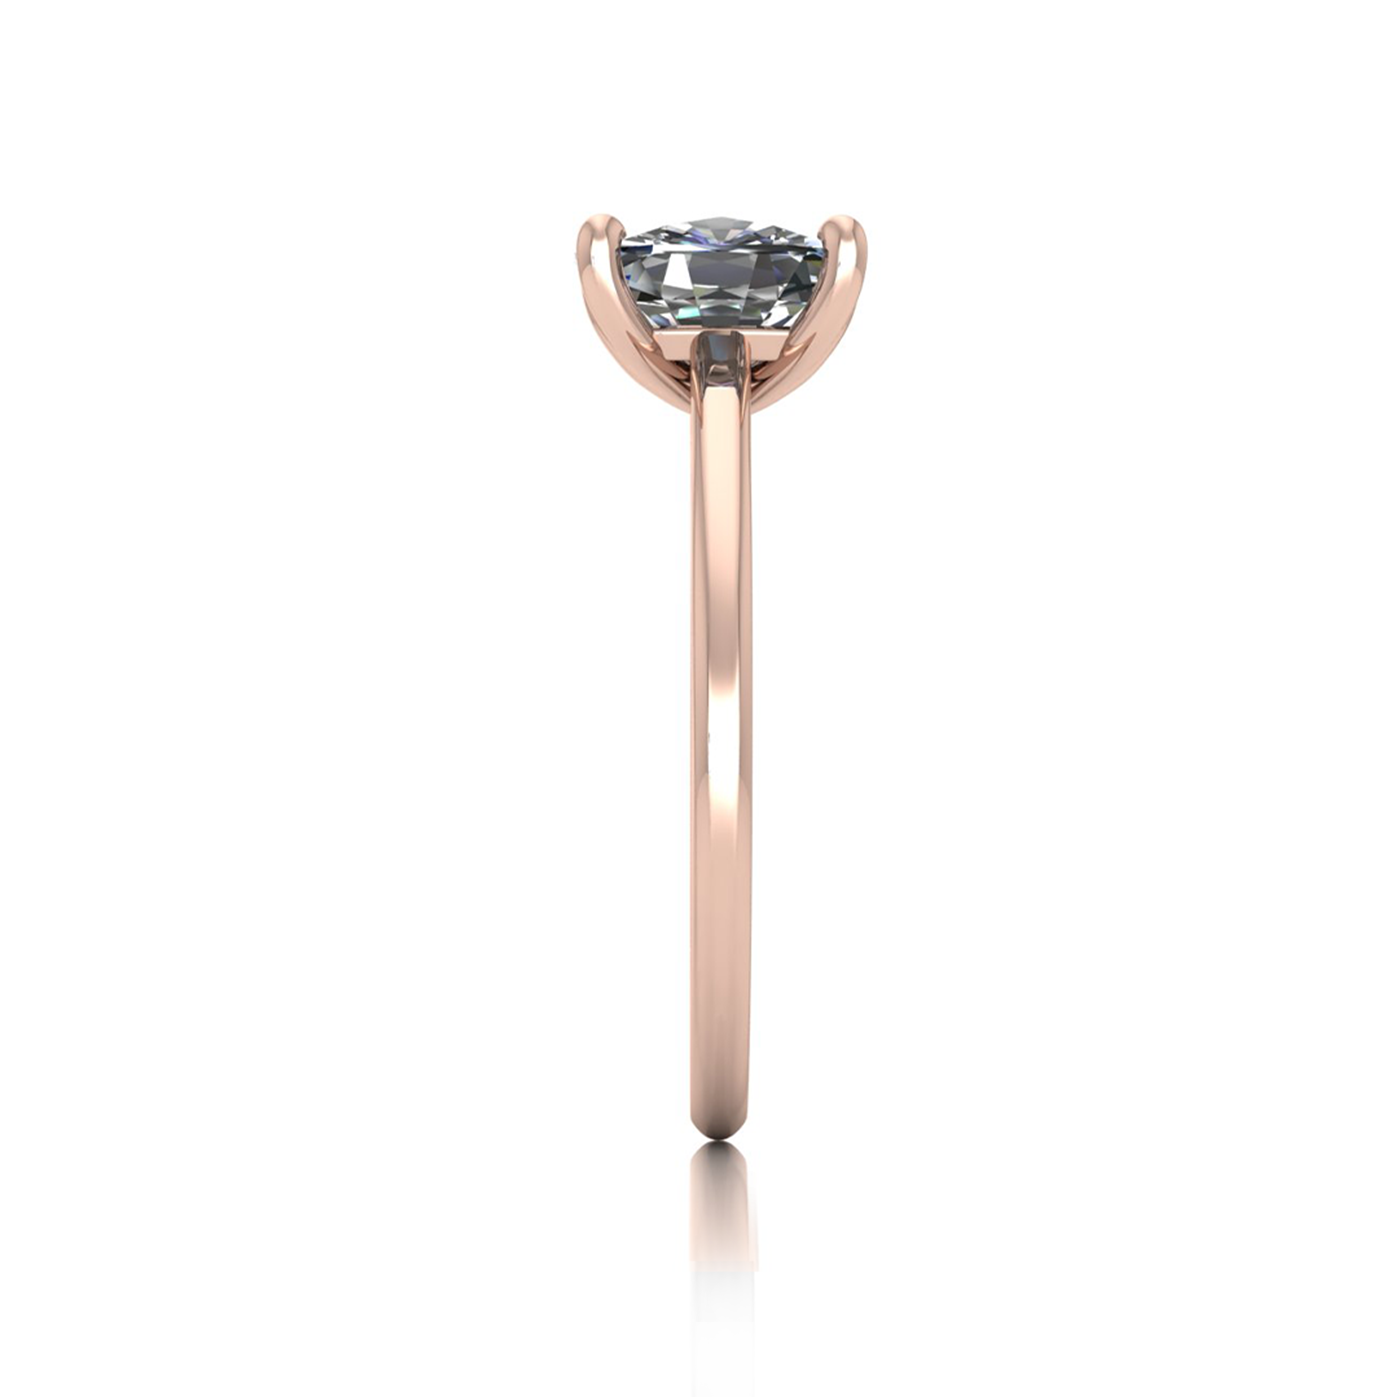 18k rose gold  2.00 ct 4 prongs solitaire elongated cushion cut diamond engagement ring with whisper thin band